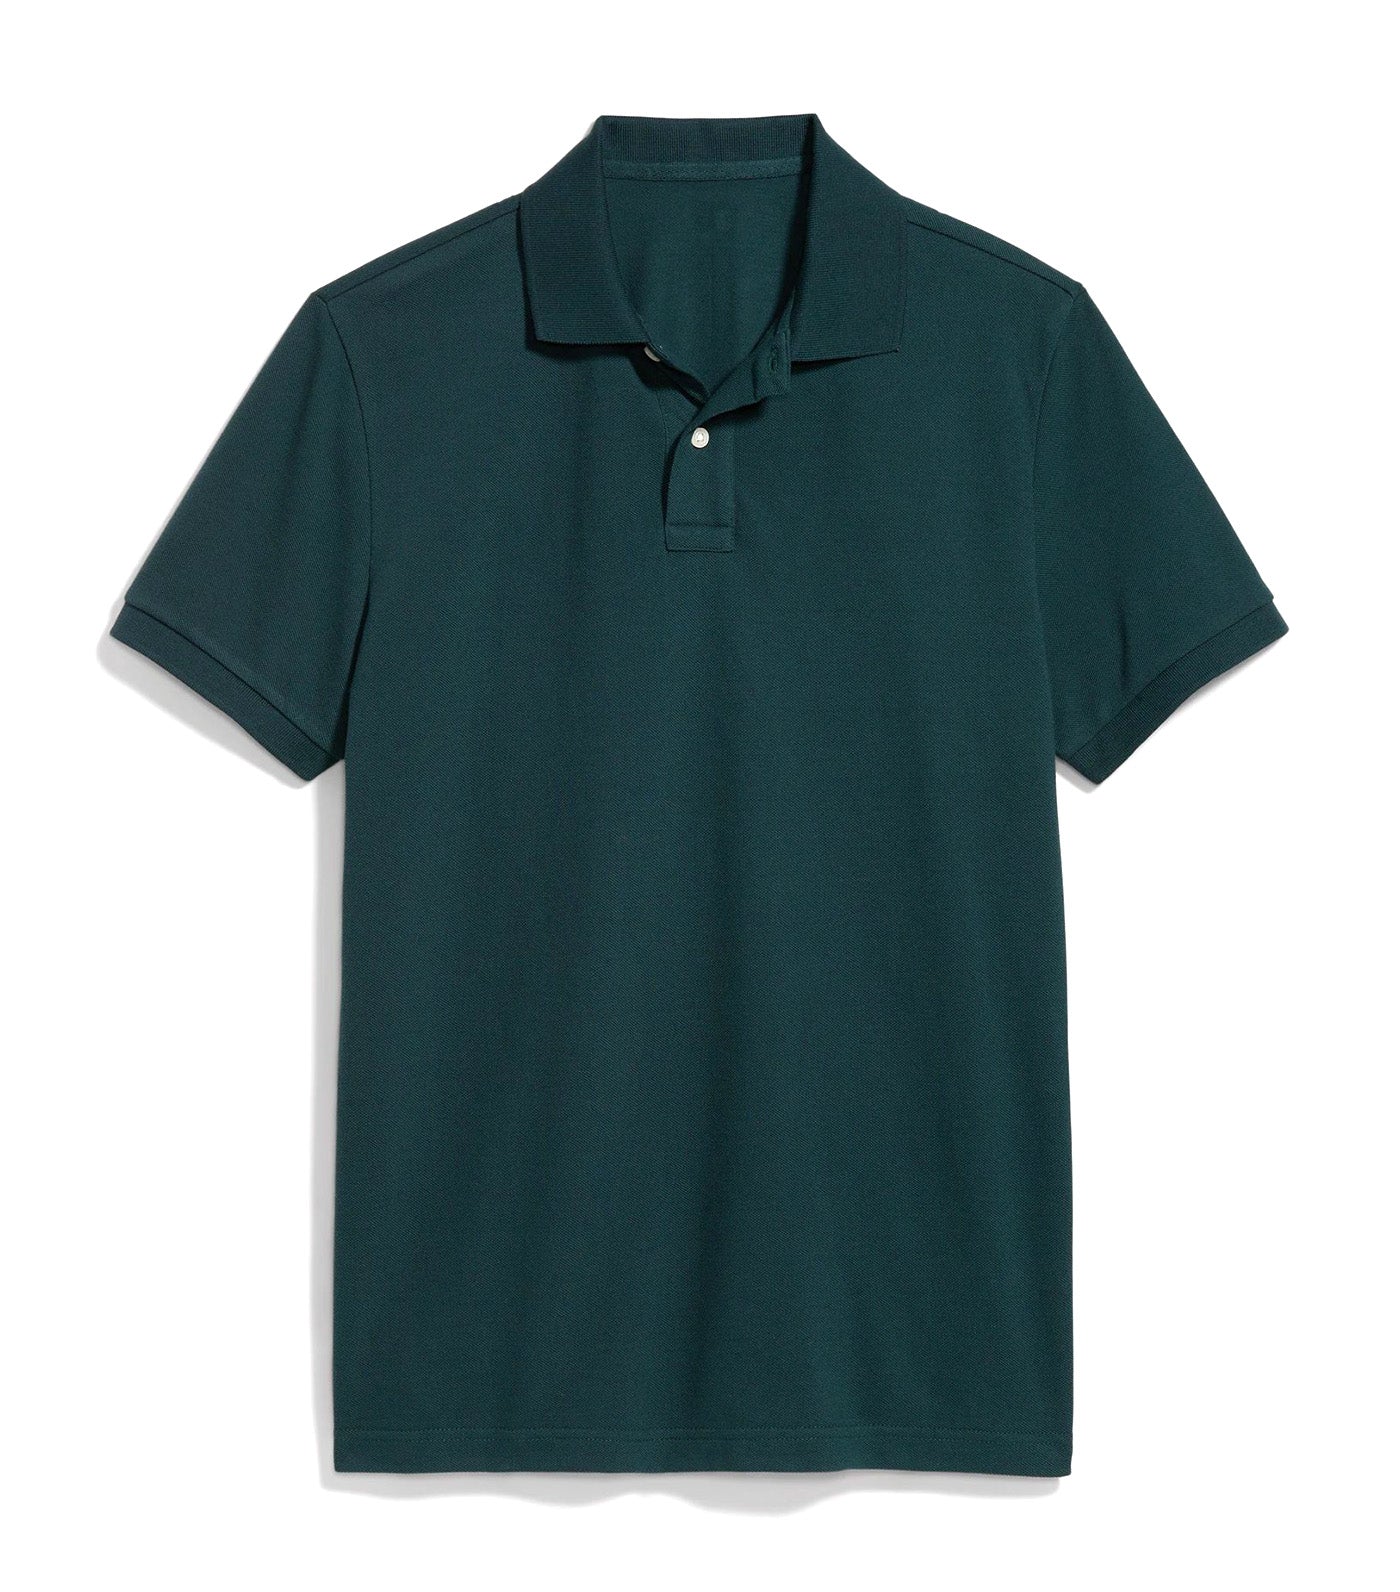 Classic Fit Pique Polo for Men Glorious Pine